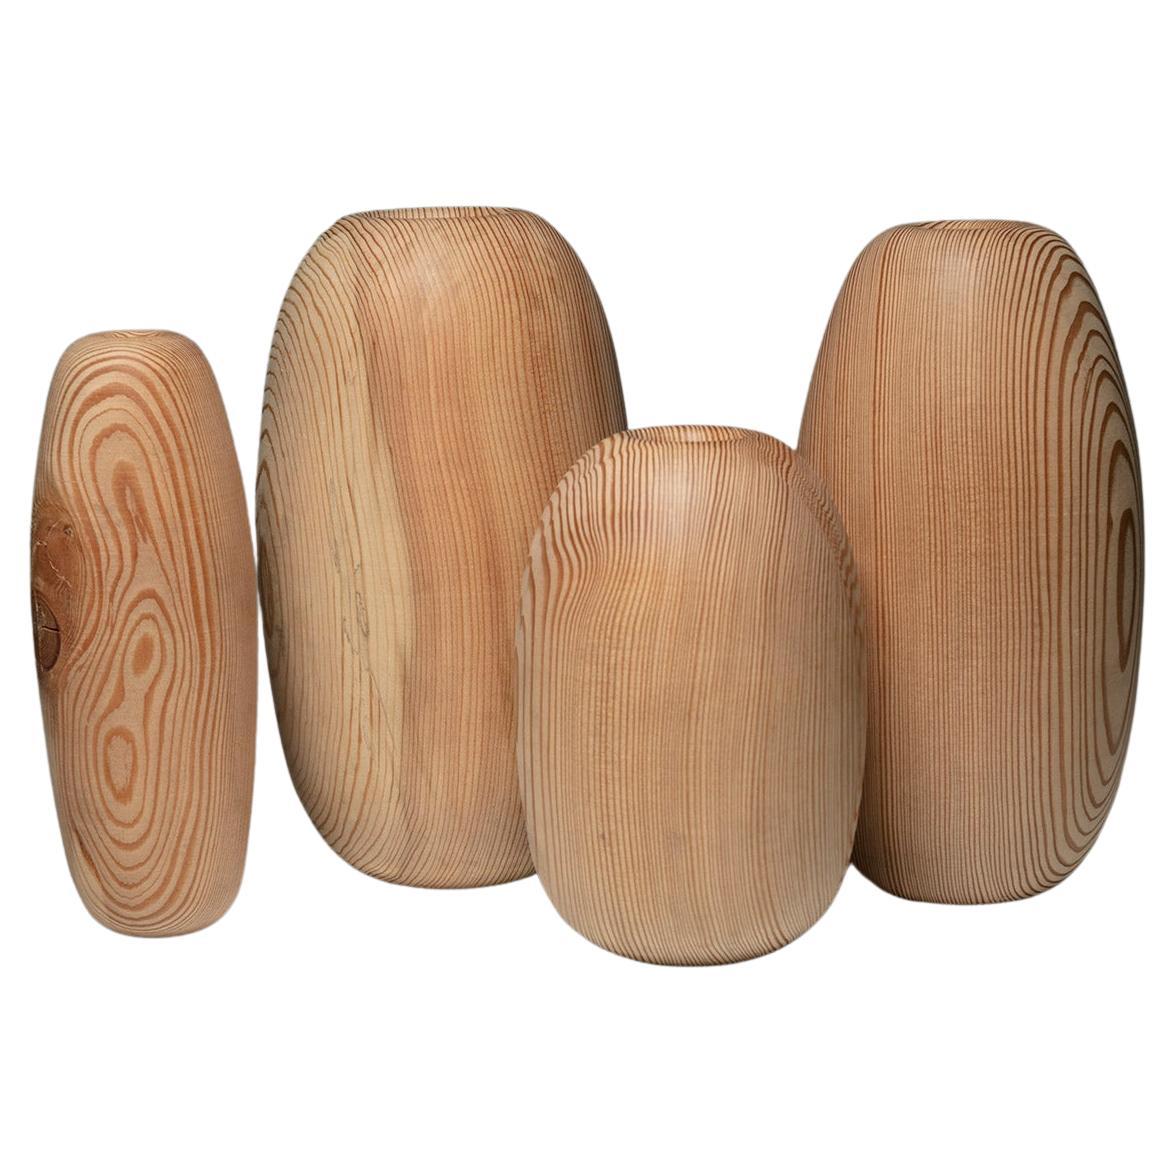 Set of Four Organic Shaped Solid Larch Wood Vases, Italy, 1980s For Sale